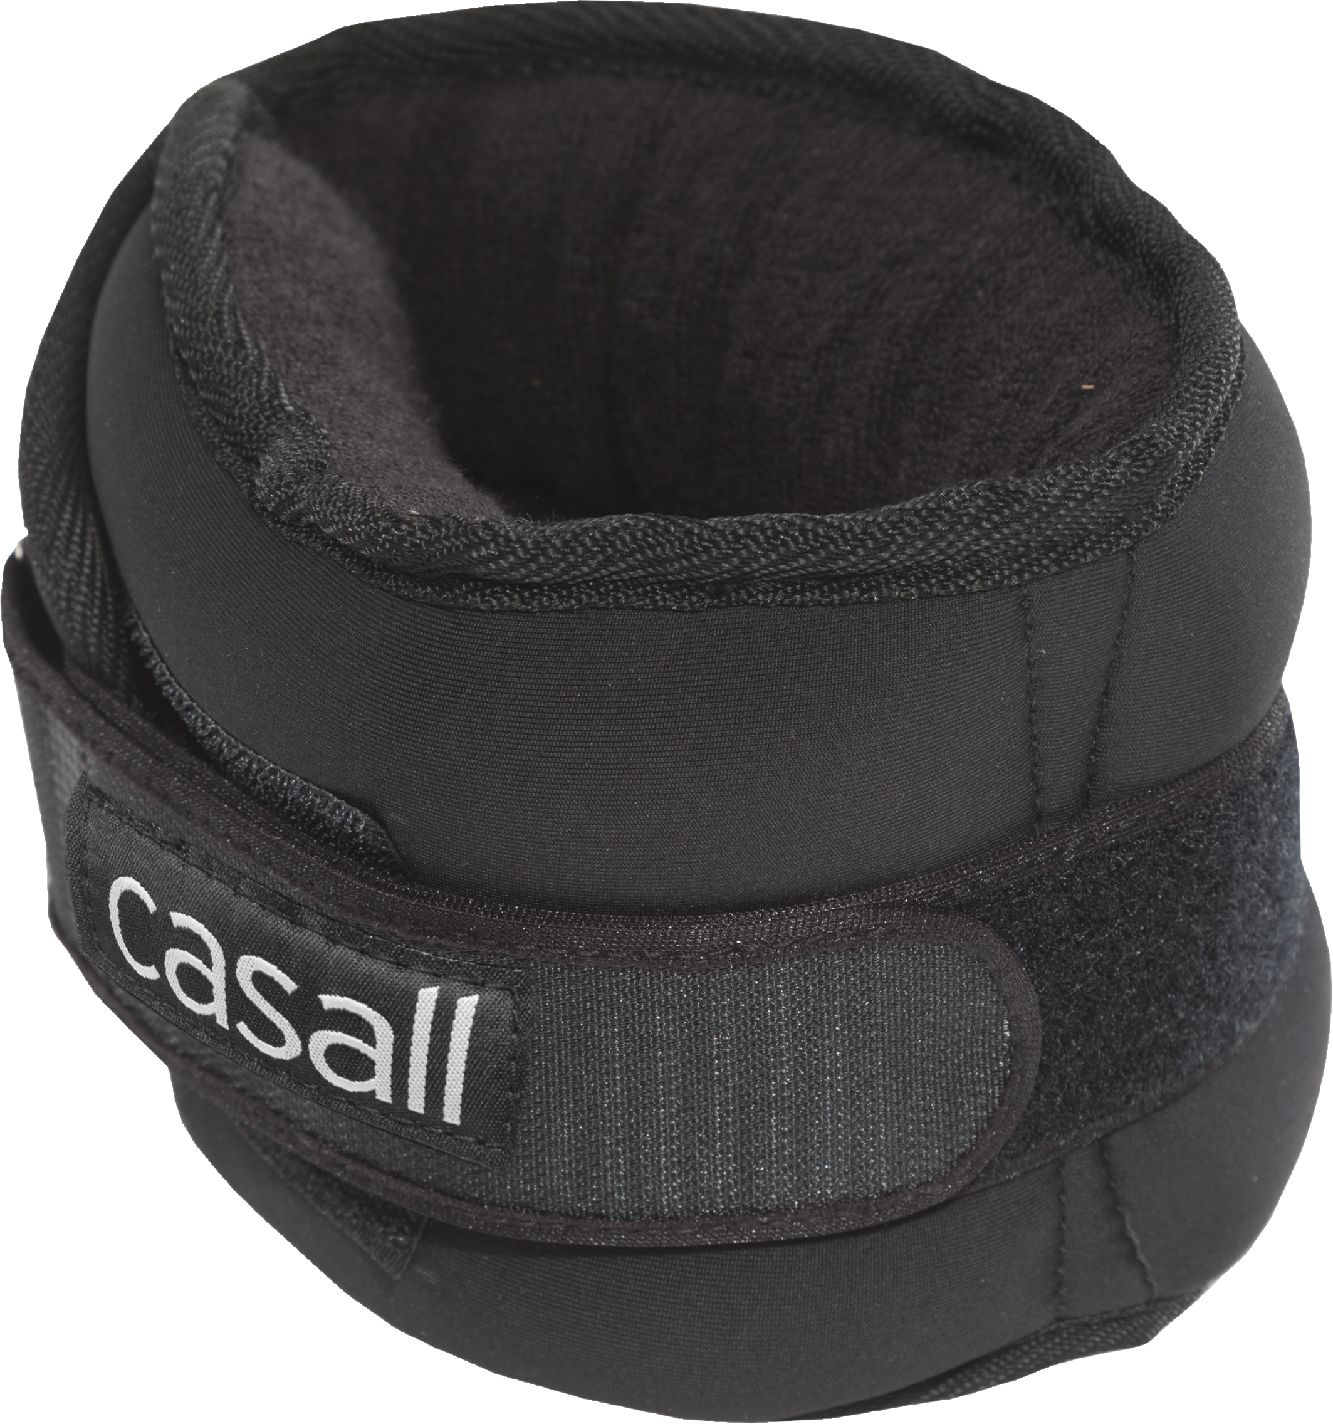 CASALL, ANKLE WEIGHT 1X3KG